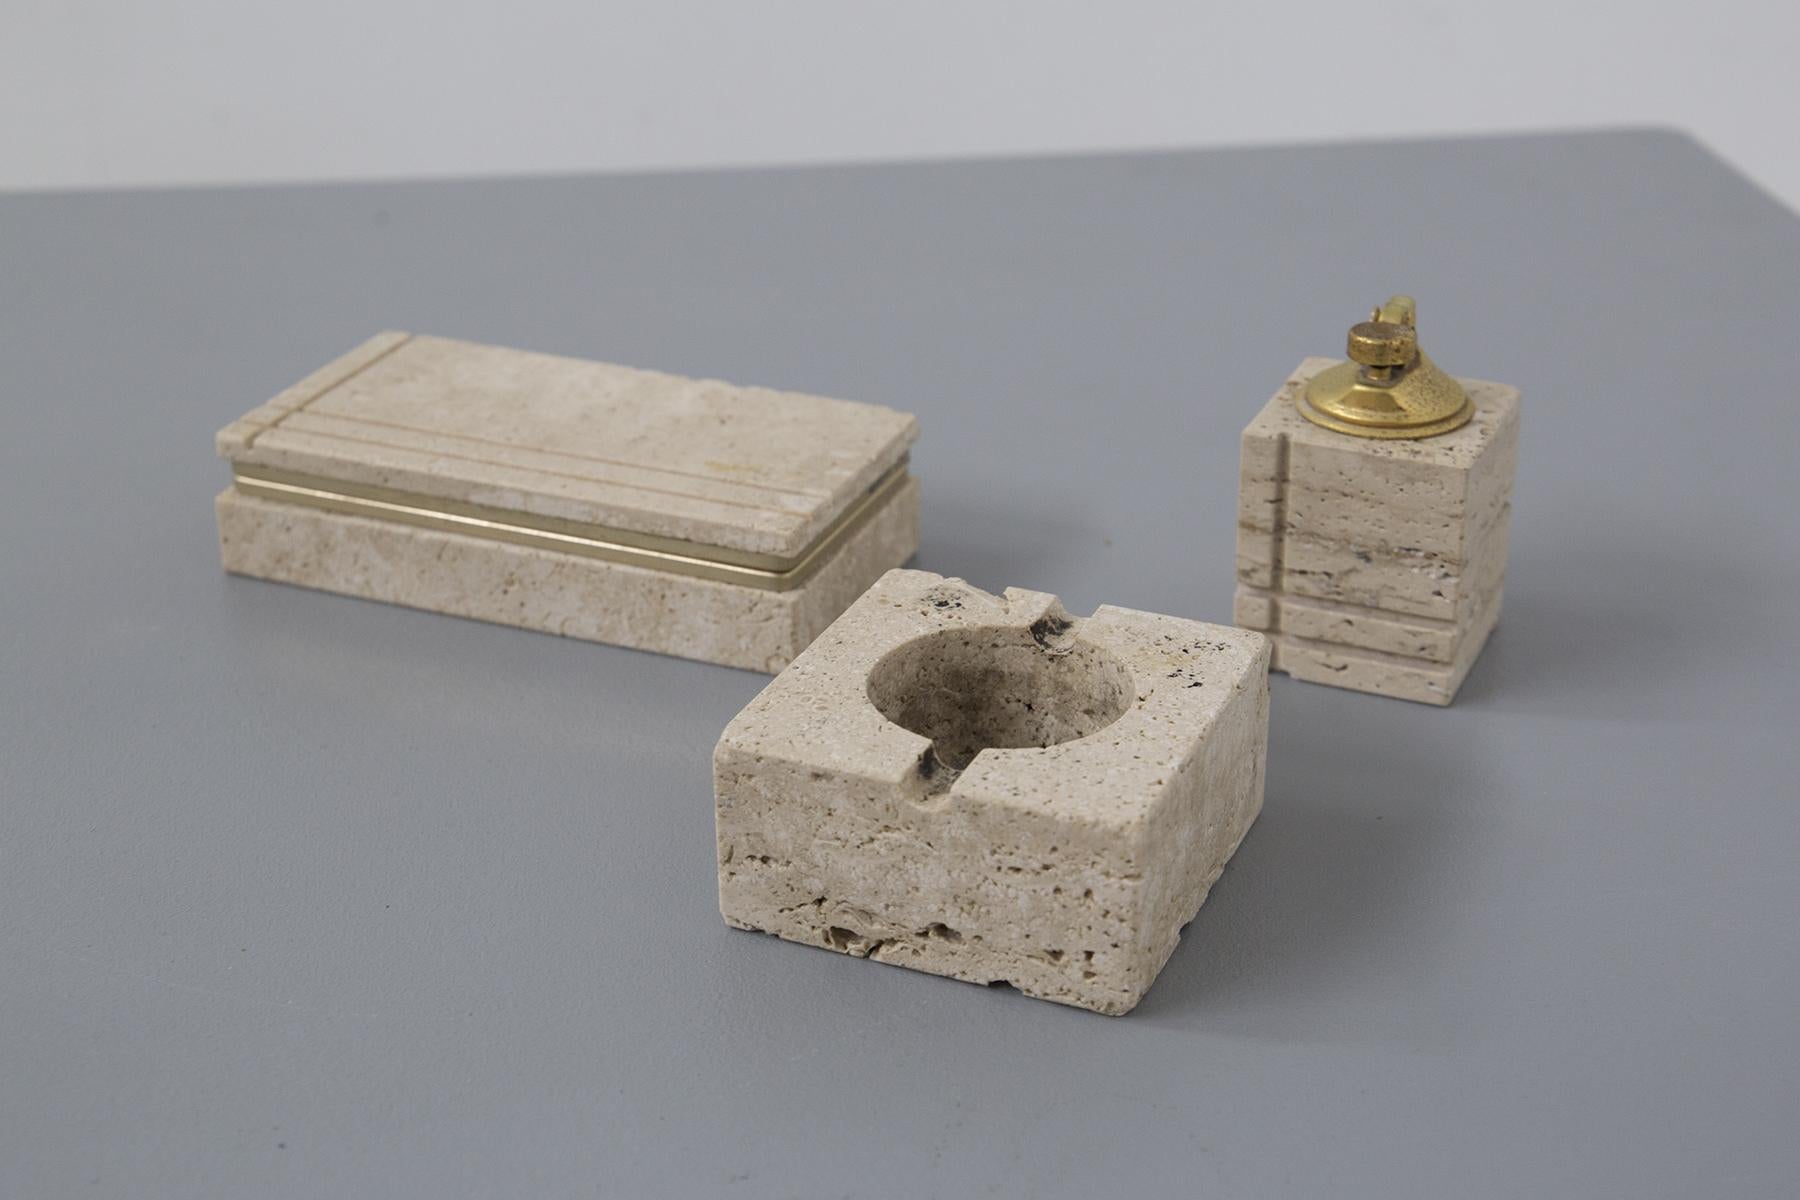 Fascinating travertine smoking set designed by the great Enzo Mari in the 1970s, of fine Italian manufacture. The brass hallmark is present.
The set is entirely made of elegant light travertine and brass. There are four pieces: the ashtray, square